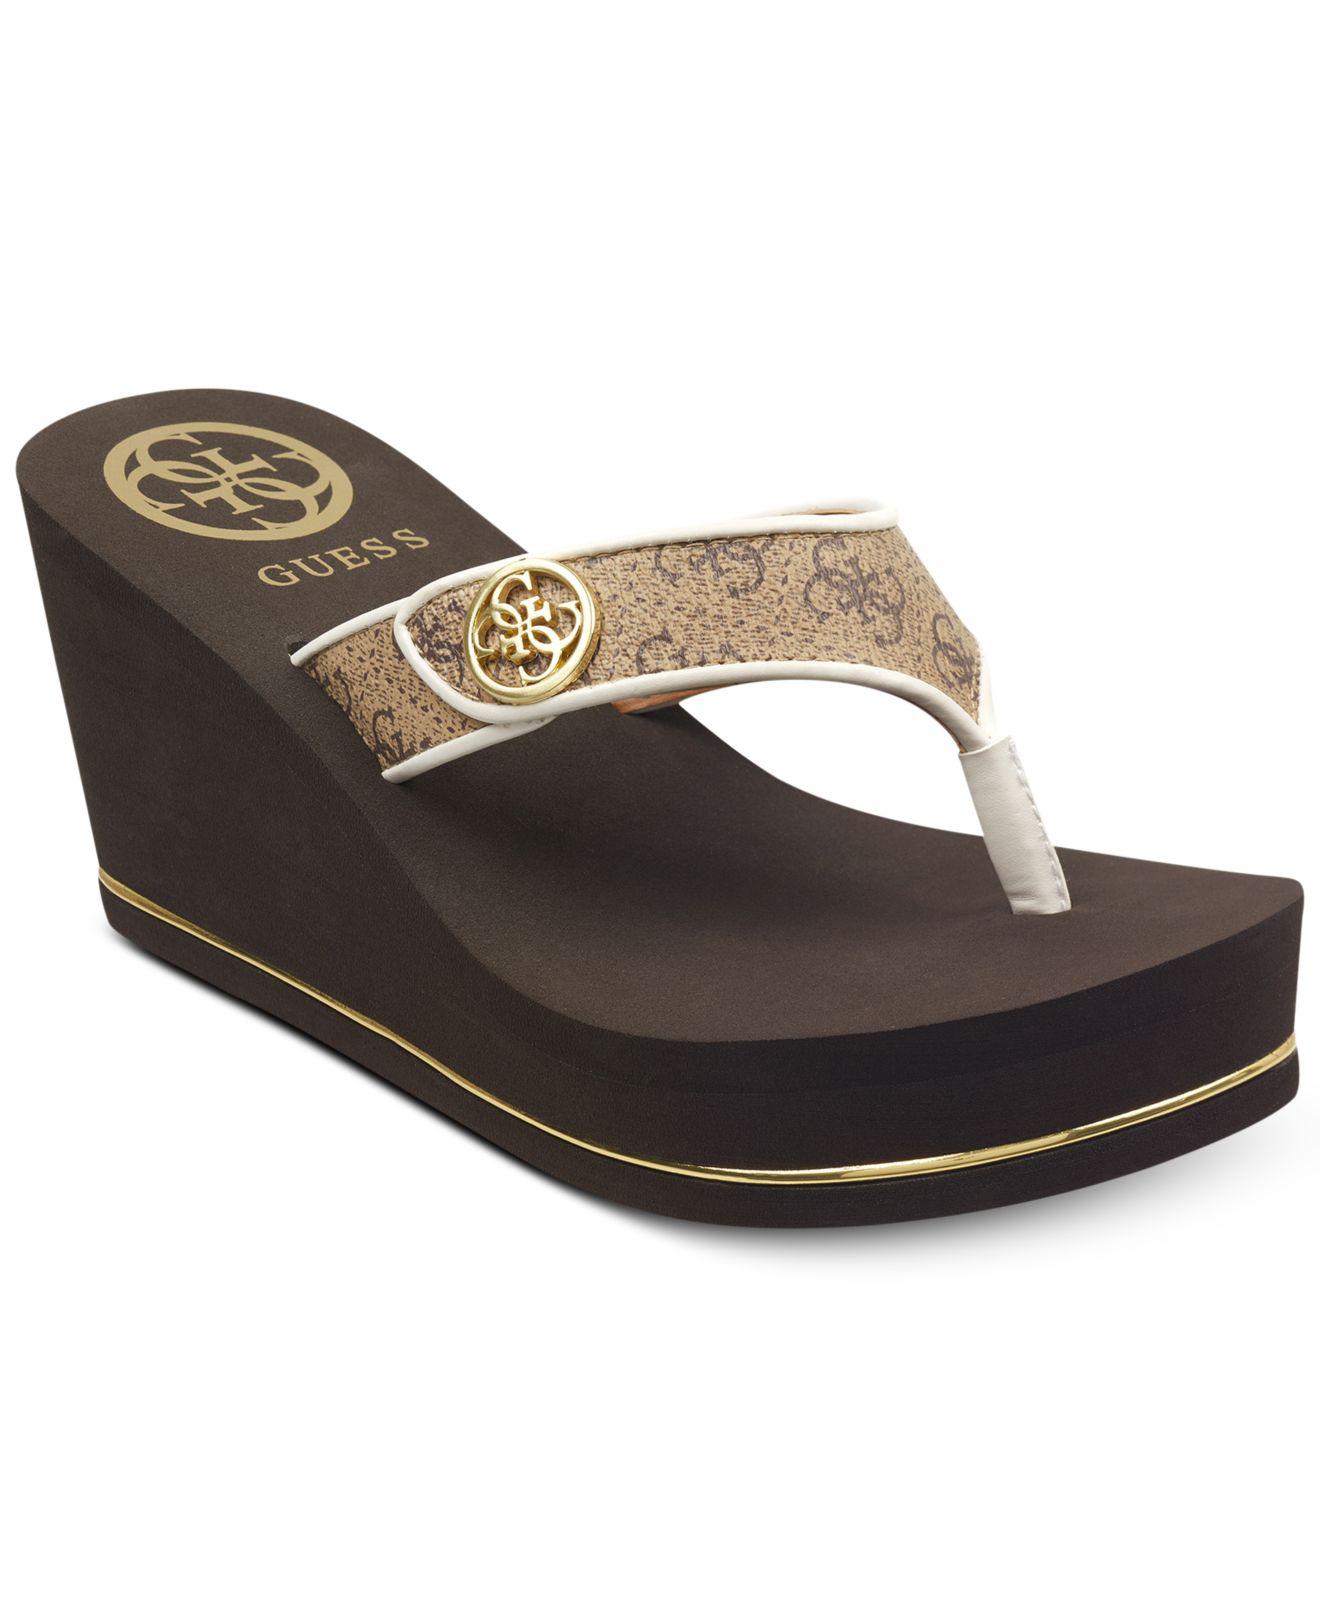 Guess Sarraly Eva Logo Wedge Sandals in Brown | Lyst